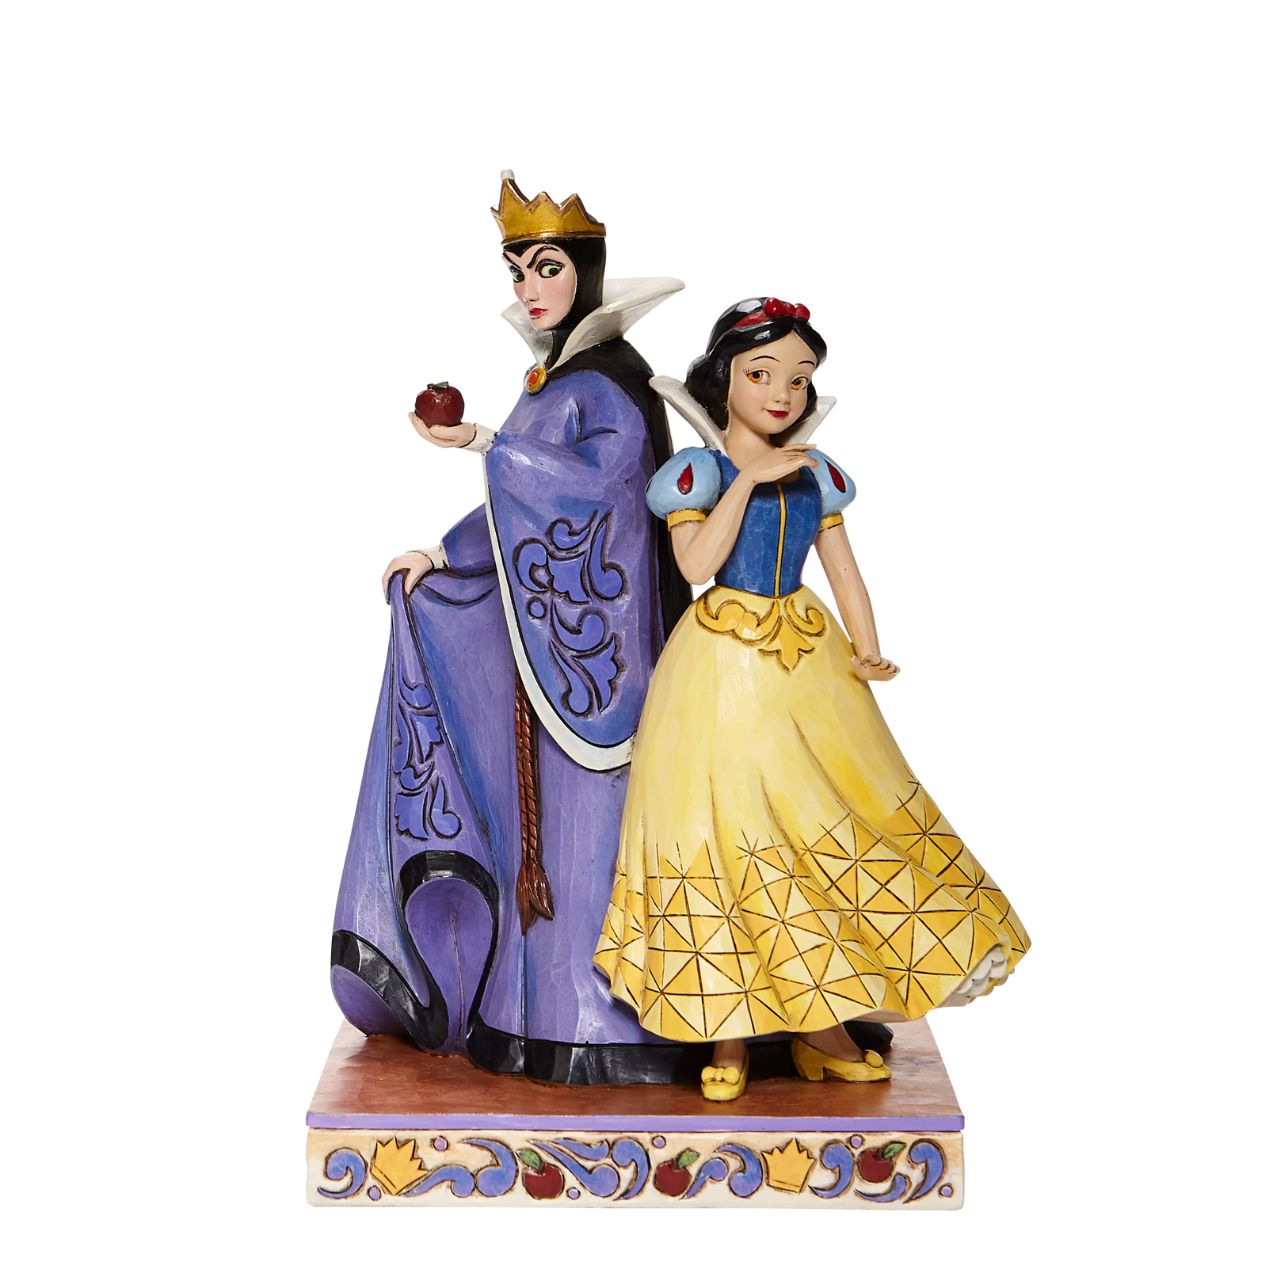 Evil and Innocence - Snow White and Evil Queen Figurine  Snow White is back-to-back with the Evil Queen in this handcrafted design inspired by the Disney classic. Richly detailed, this compelling scene of good and evil features the vibrant colour and folk-art motifs that are unmistakably Jim Shore.